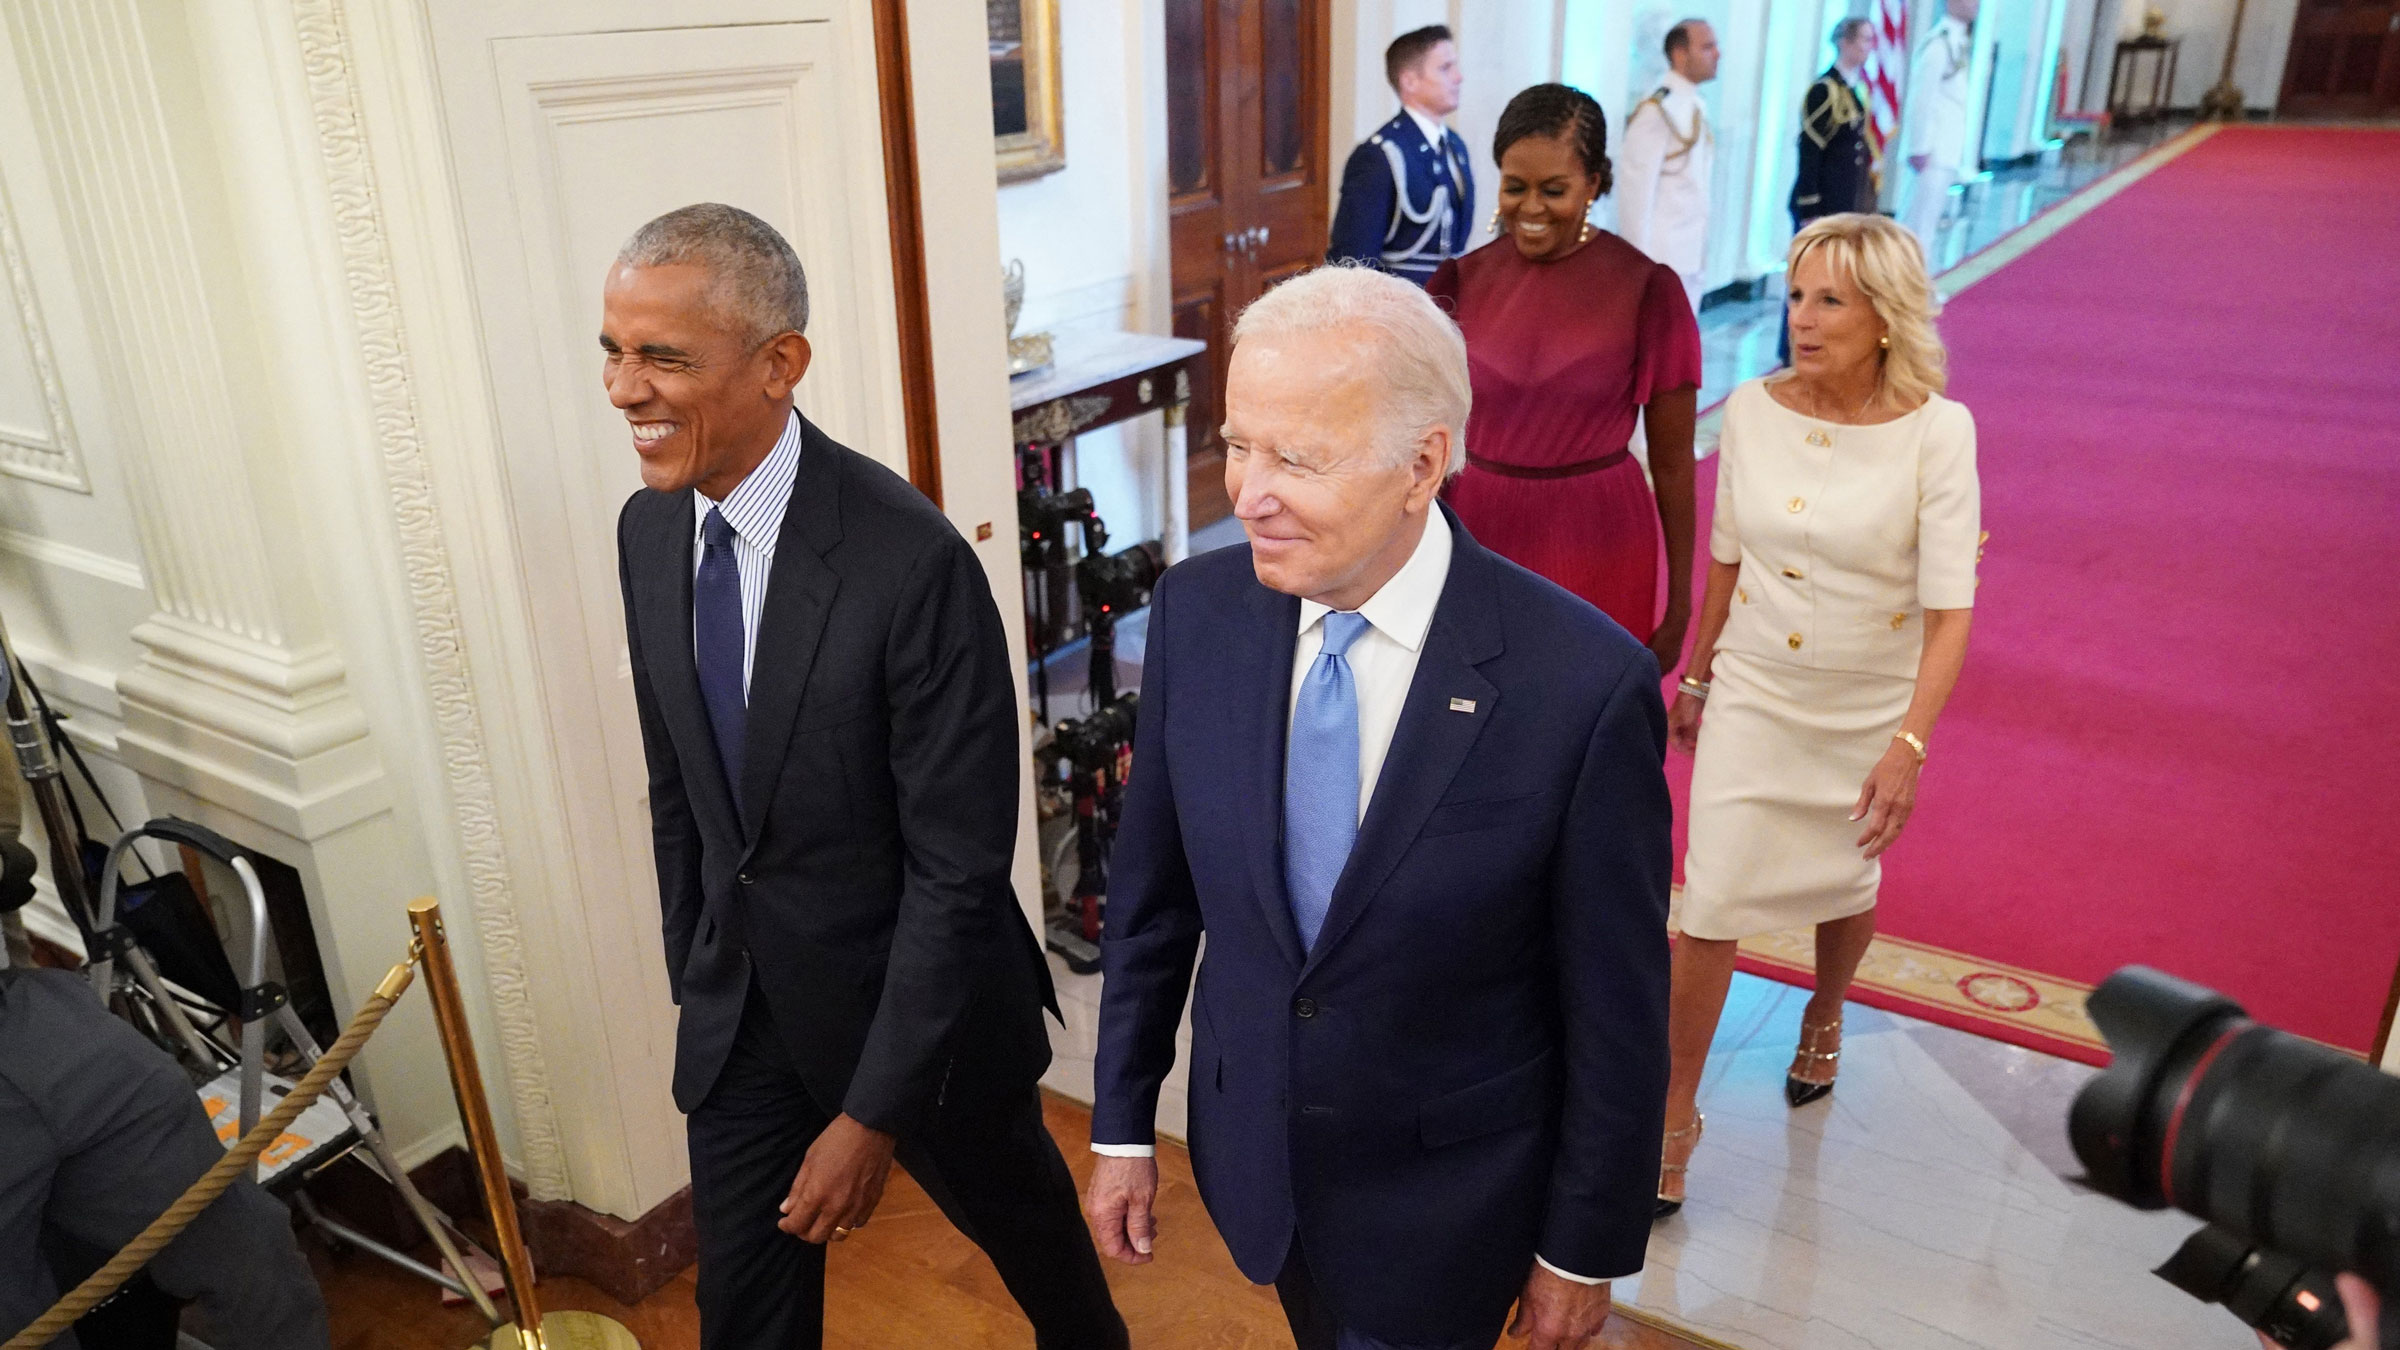 Former President Barack Obama and President Joe Biden are trailed by former first lady Michelle Obama and first lady Jill Biden as they arrive for Wednesday's ceremony.